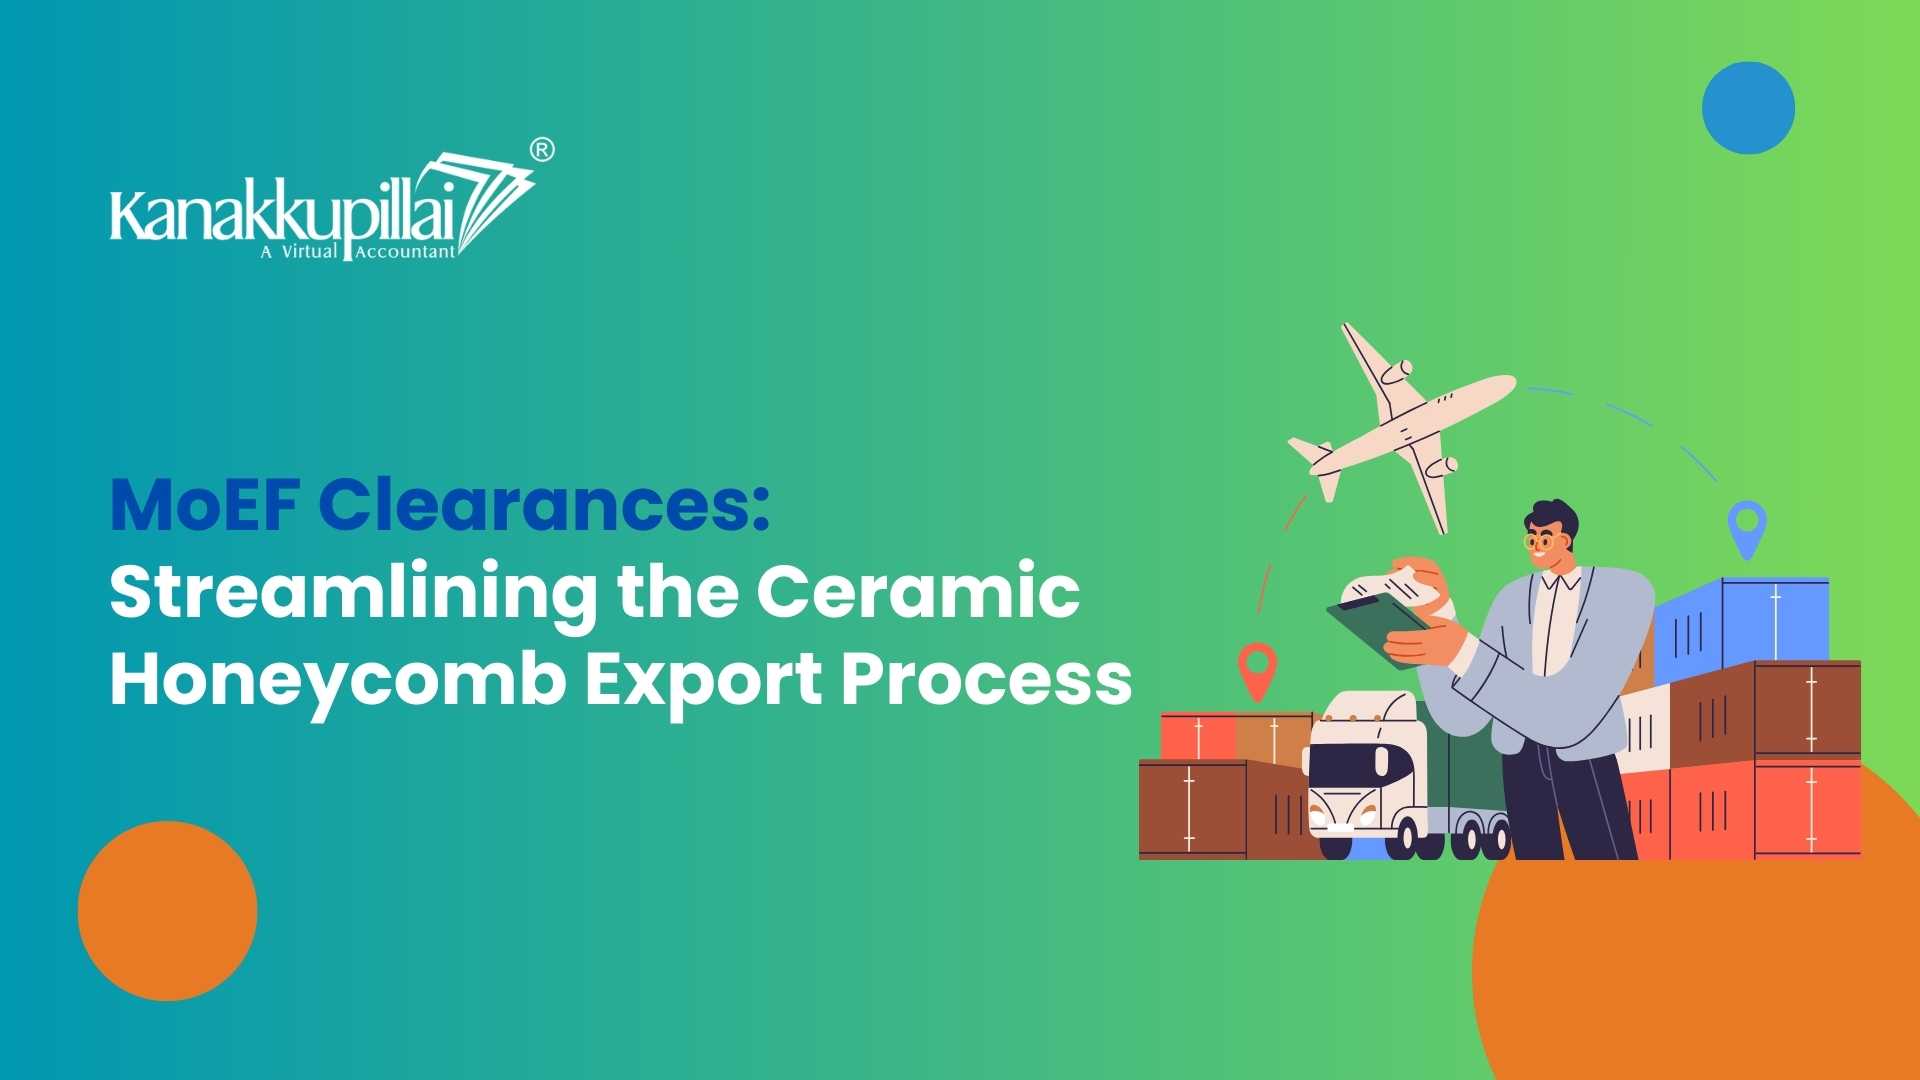 You are currently viewing MoEF Clearances: Streamlining the Ceramic Honeycomb Export Process